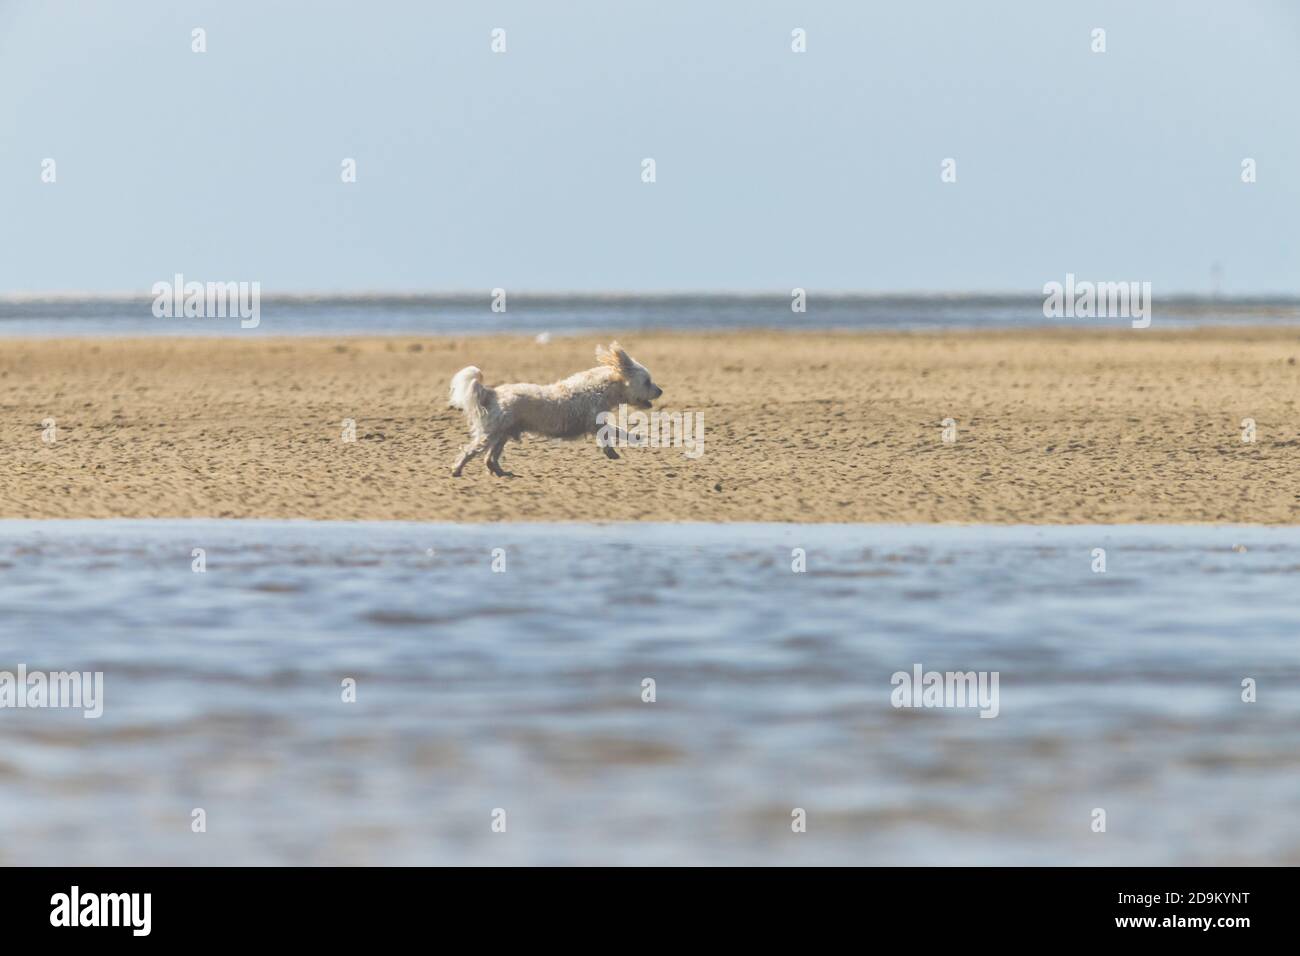 Leisure time and the sea - on the Wadden Sea. A small white dog runs and jumps across the beach and is happy. Stock Photo